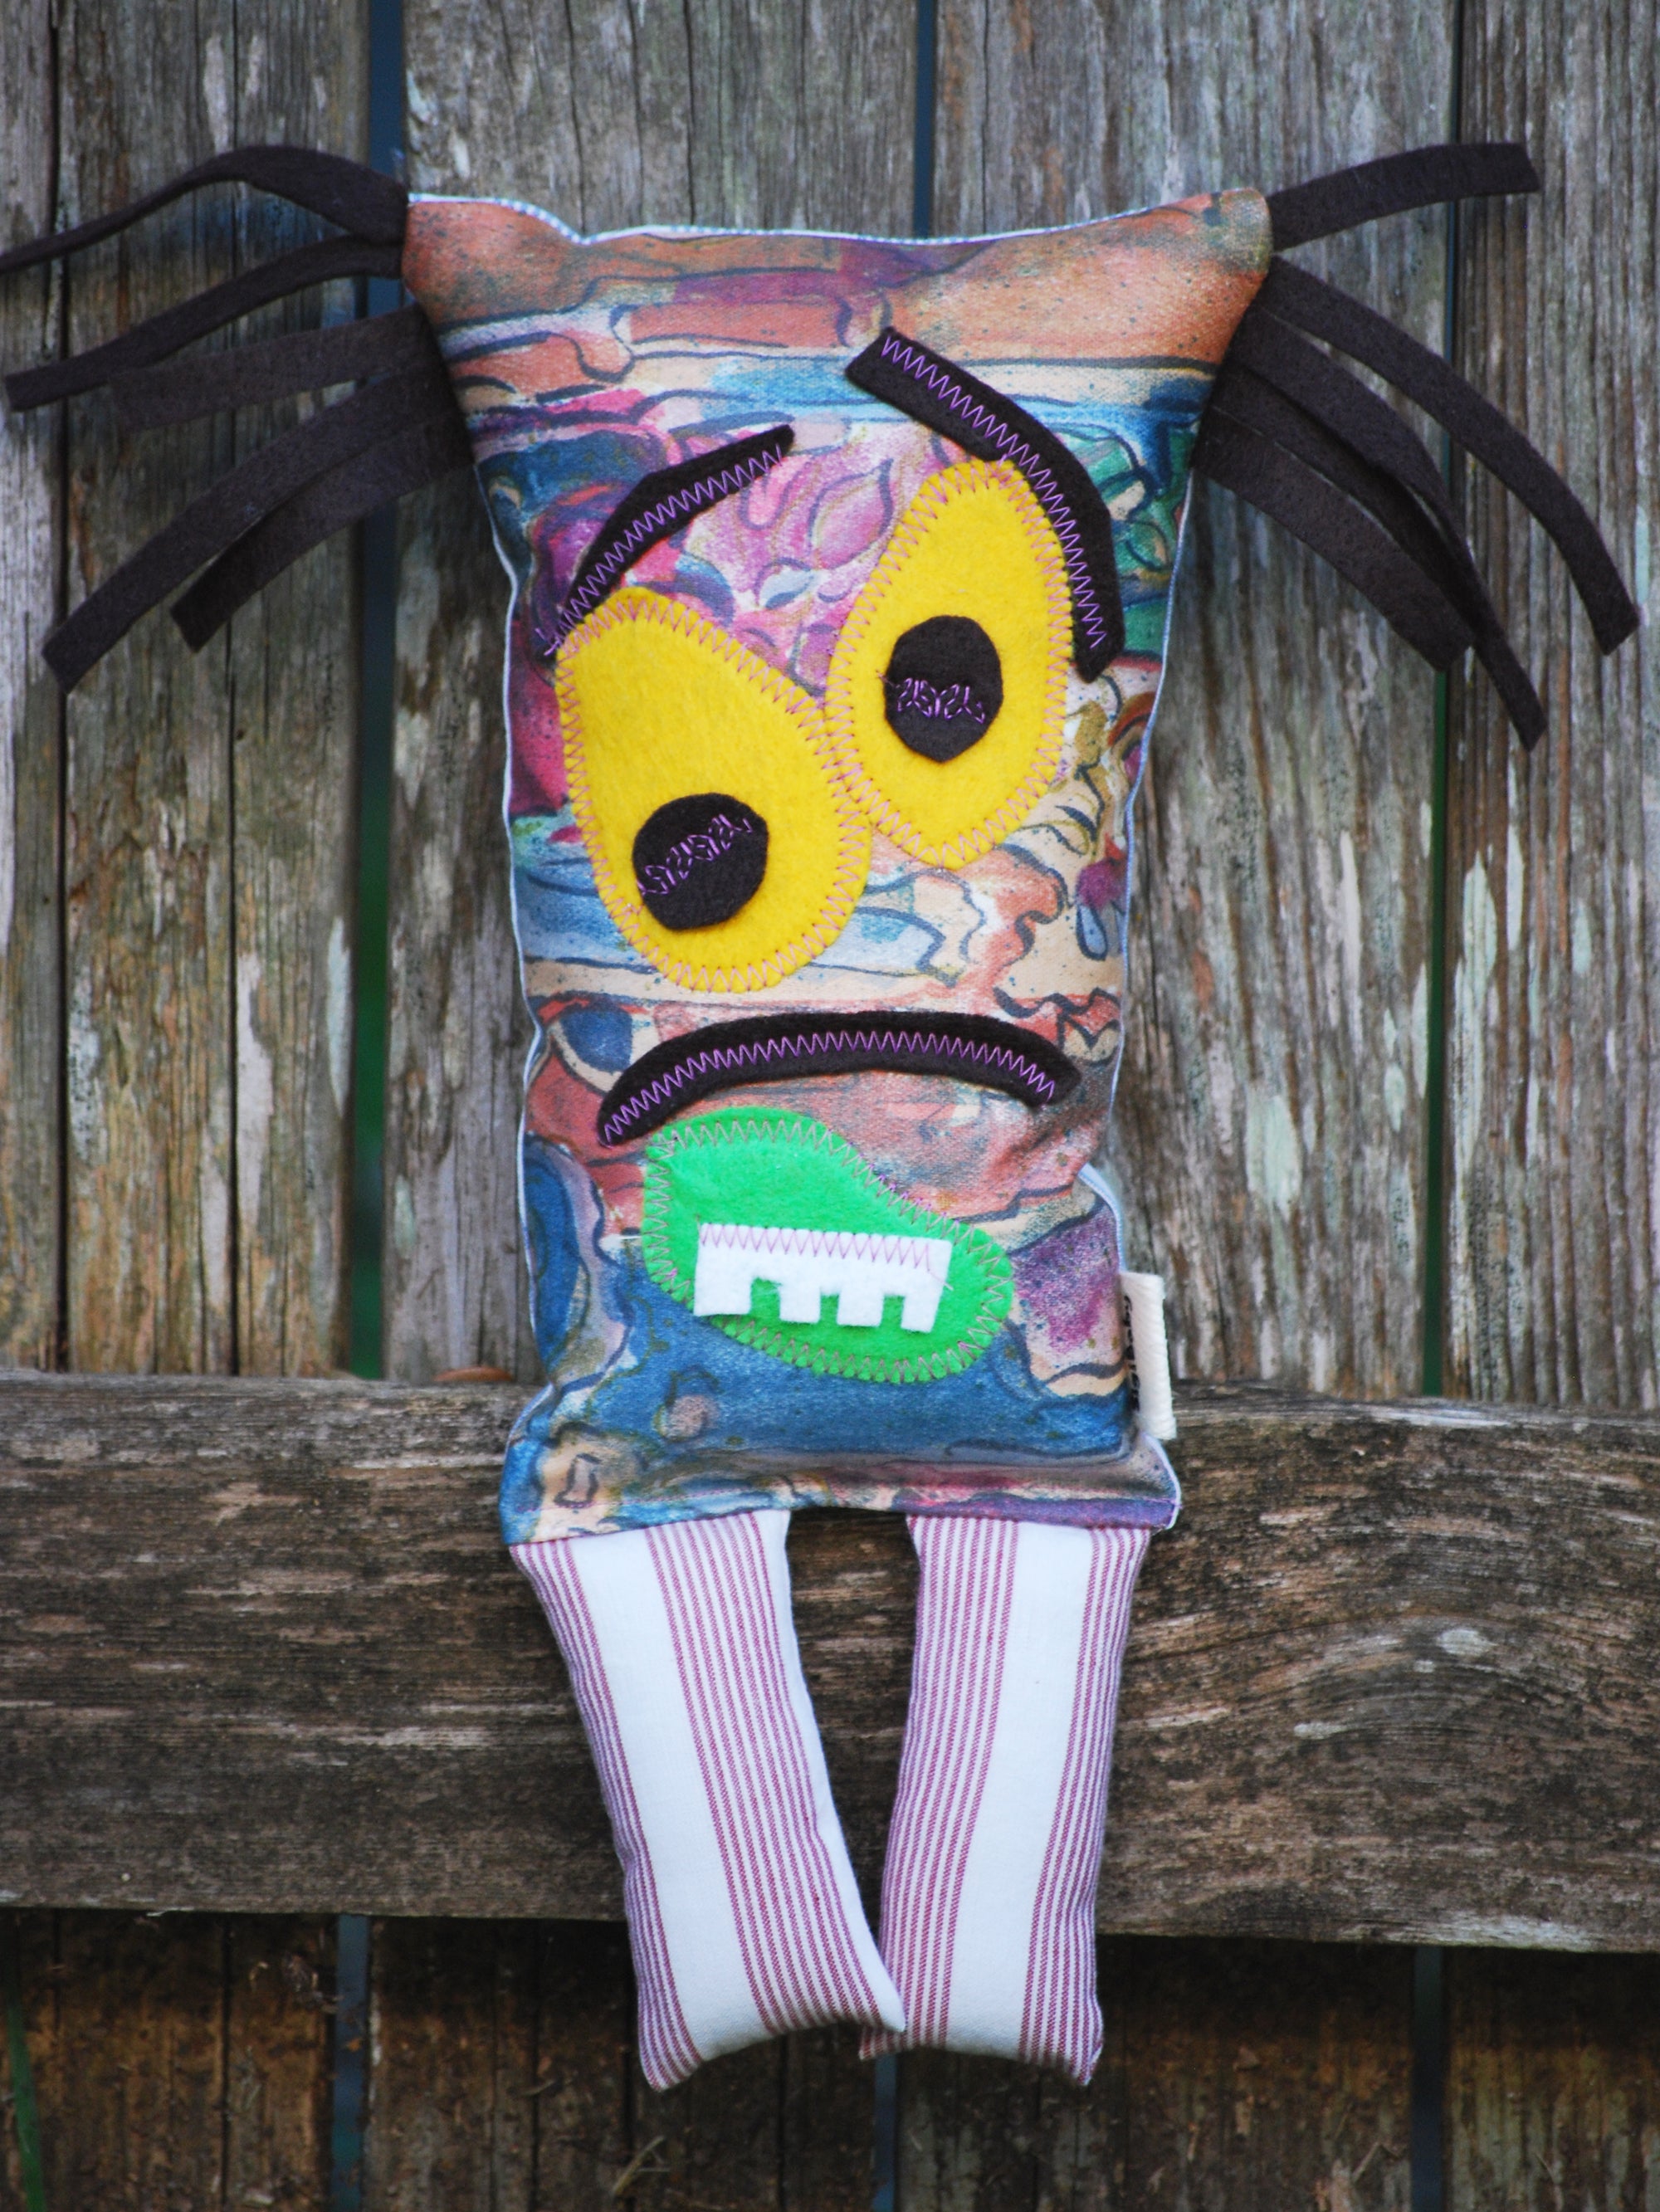 Little Monster "Wolfgang" Handmade Recycled Fabric Plush Toy Doll